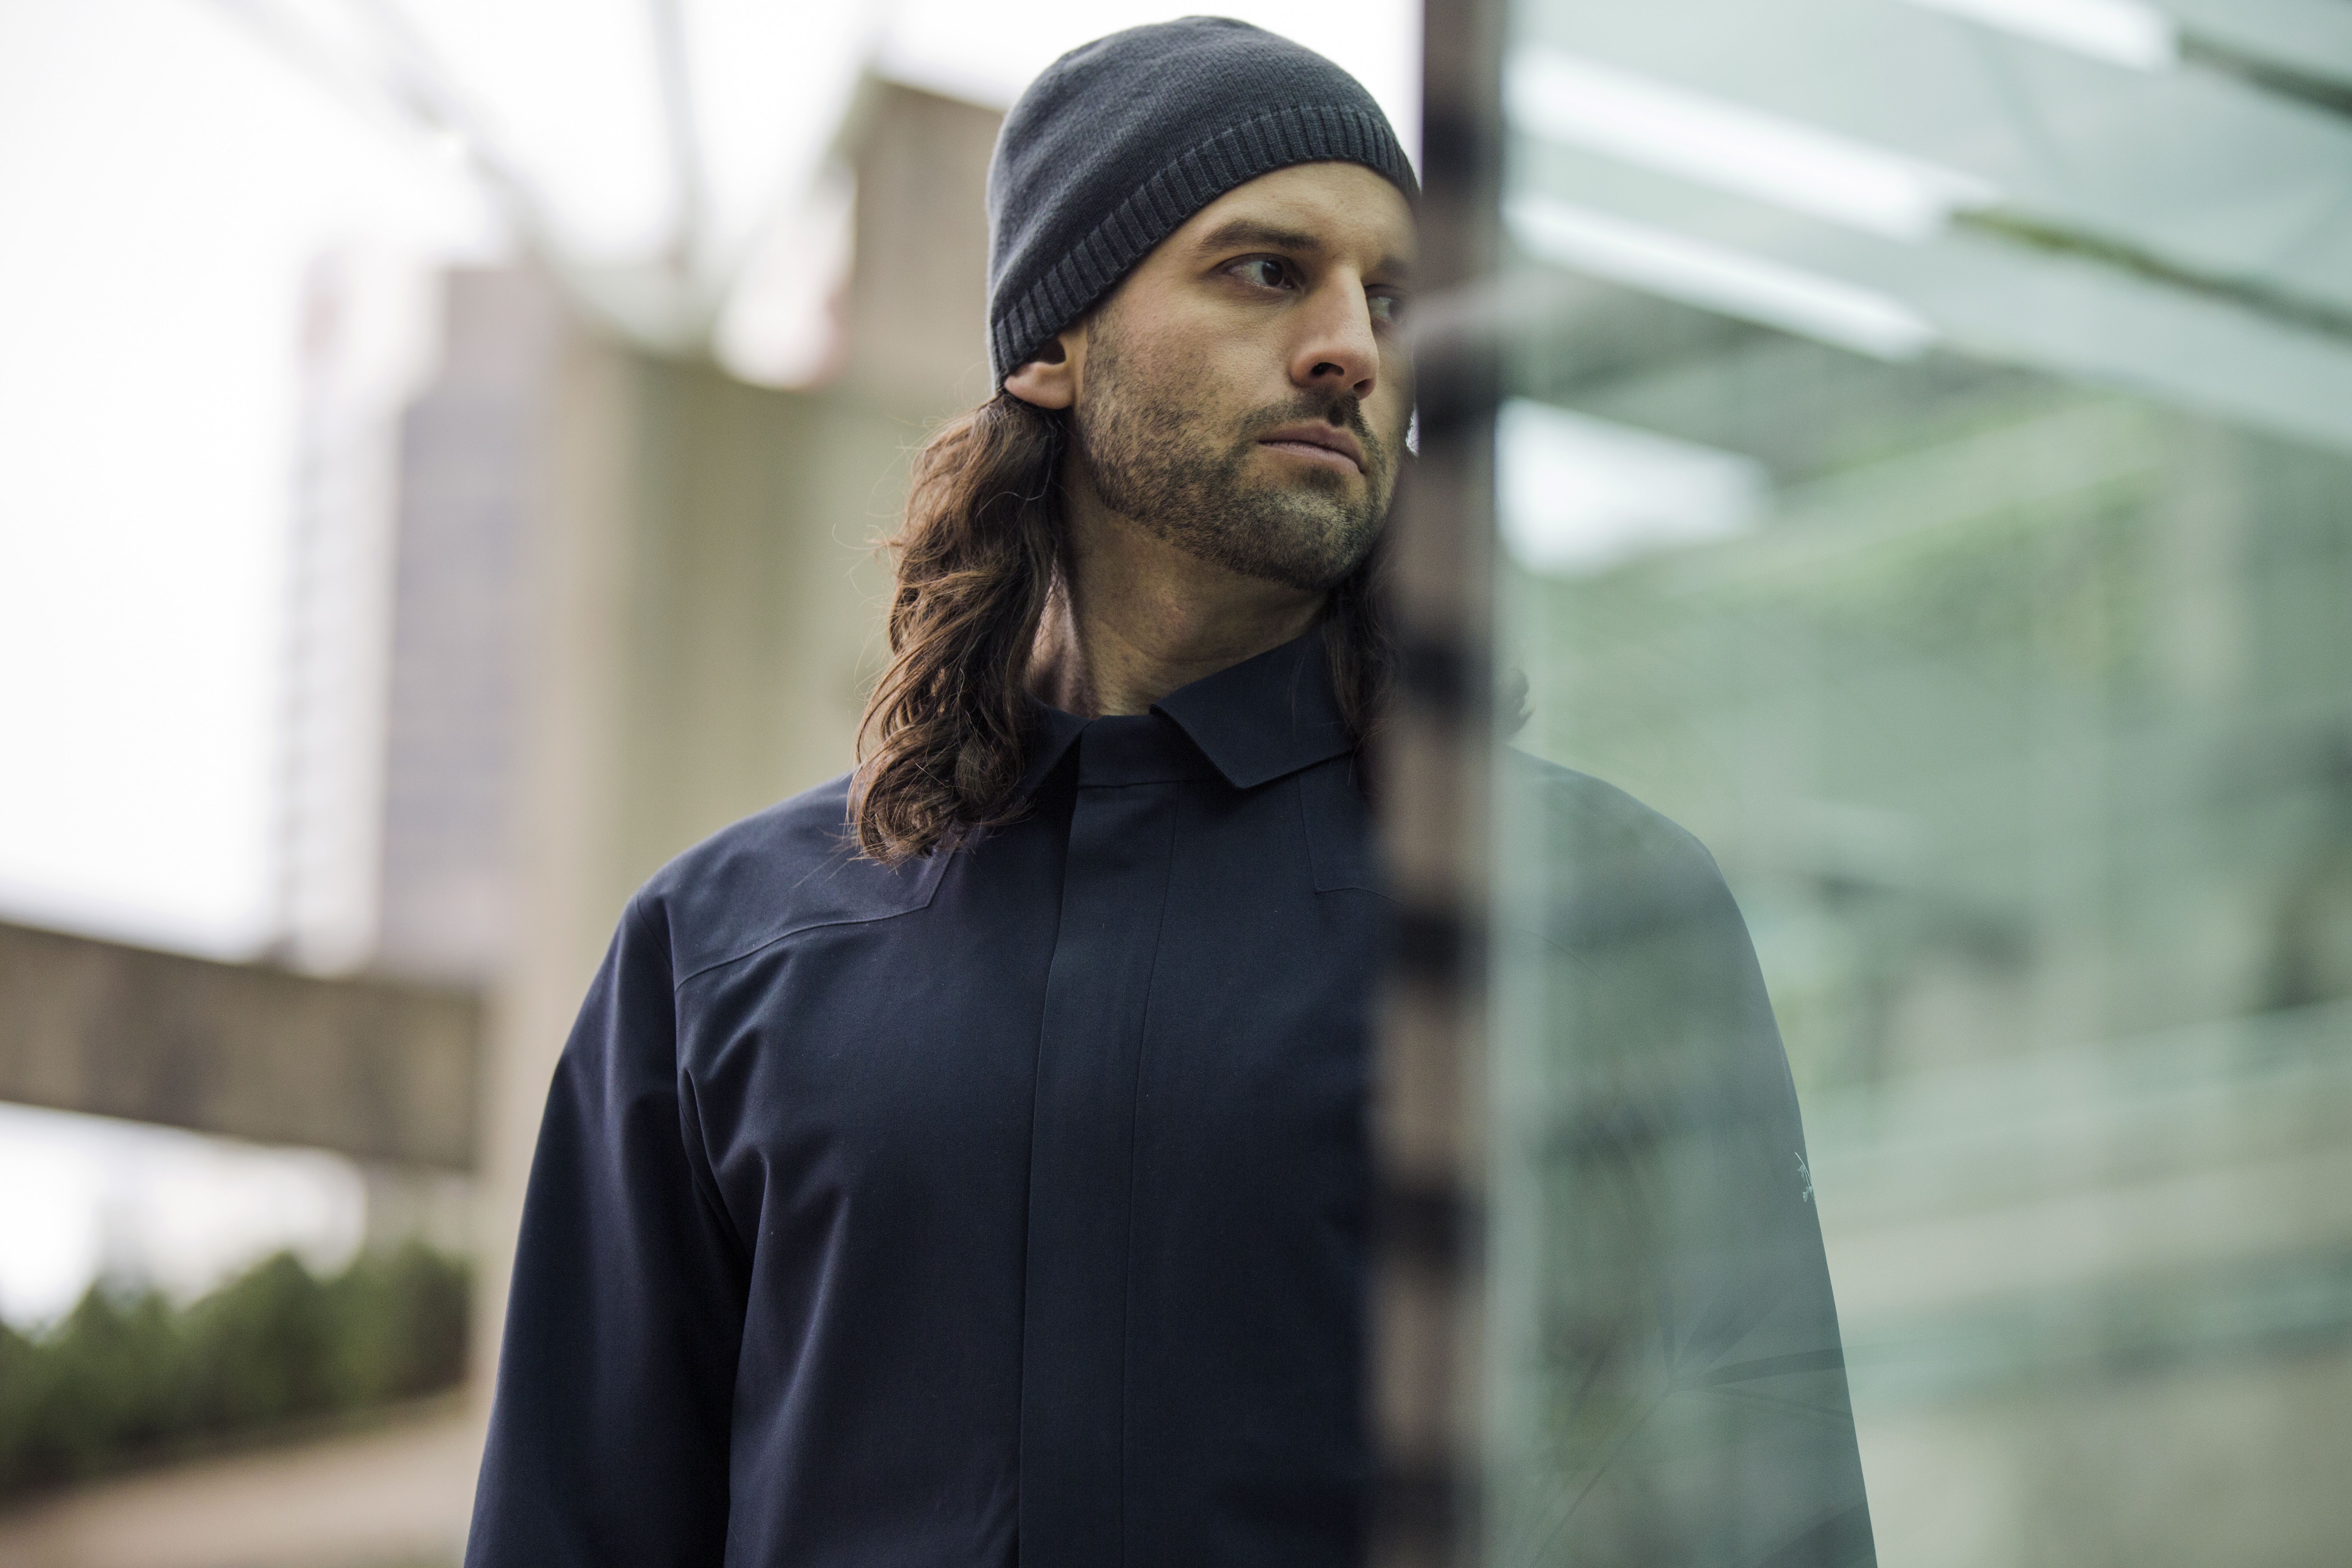 Arc'teryx Present Their 24 Collection - Designed For Urban Life